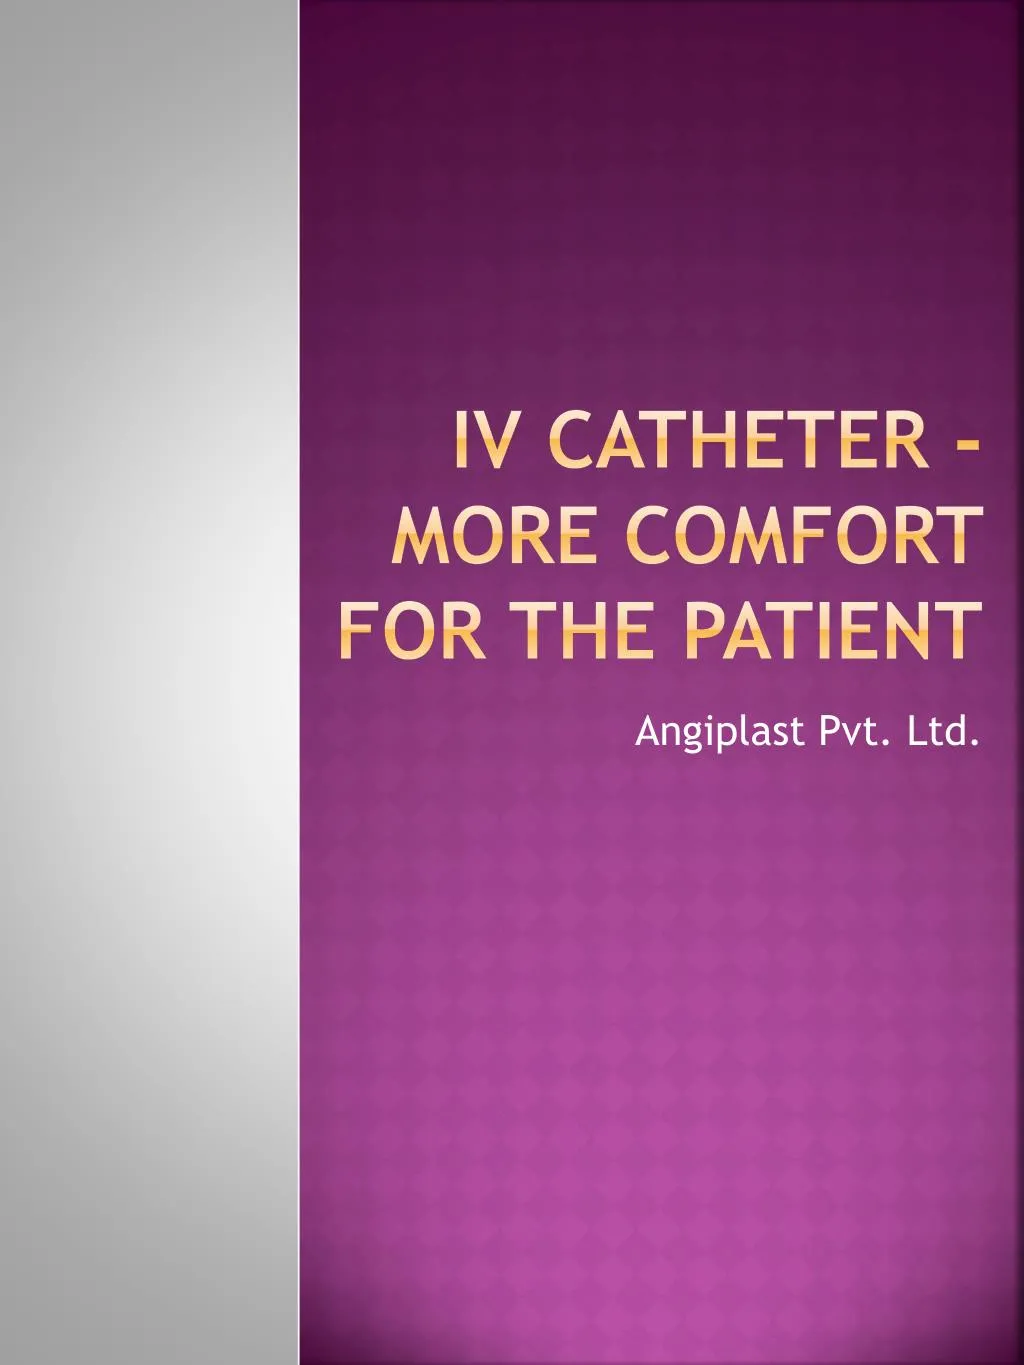 iv catheter more comfort for the patient